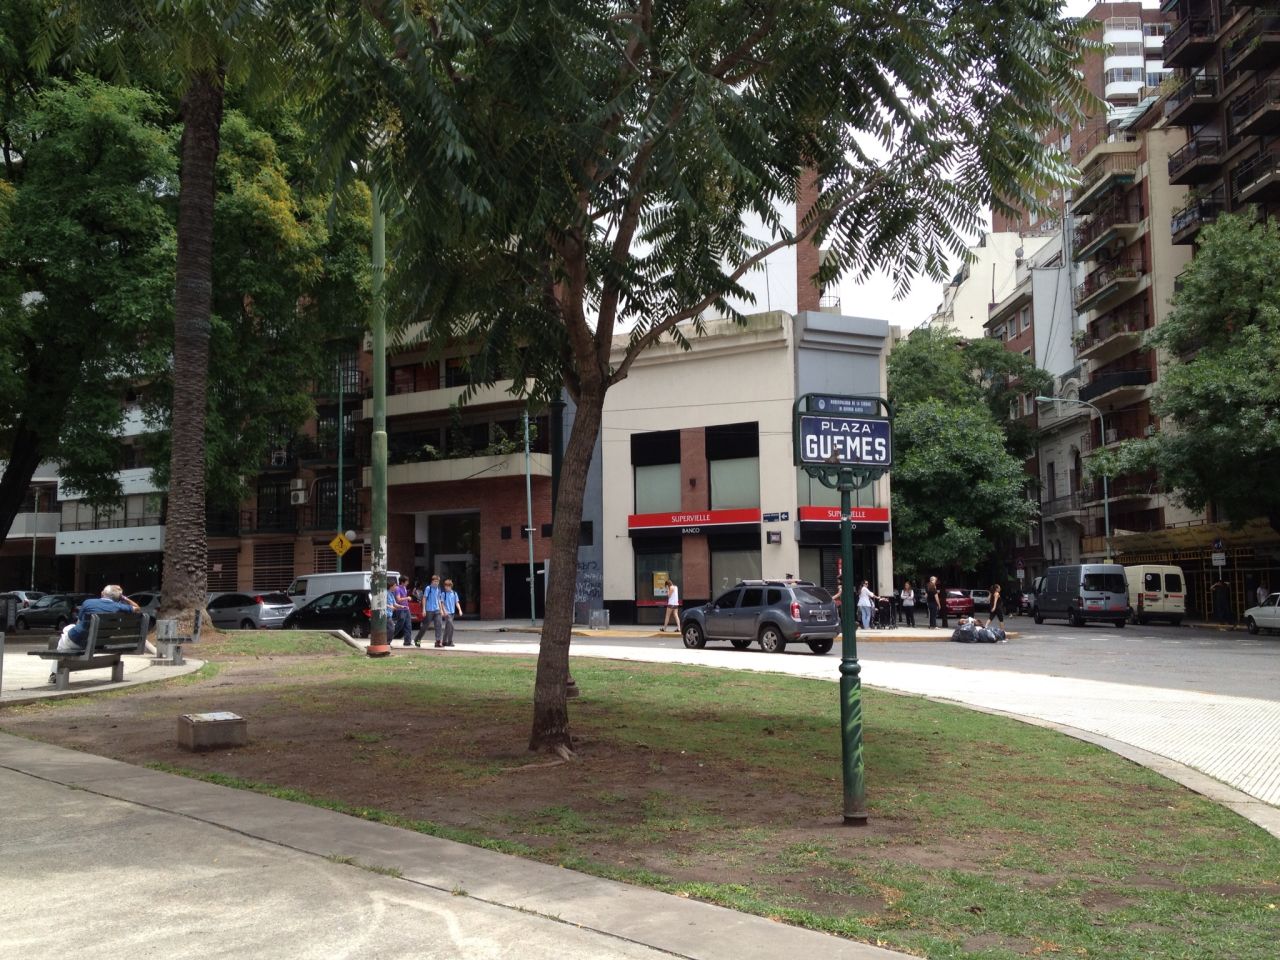 The area around Plaza Guemes in the Palermo district of Buenos Aires is nicknamed "Villa Freud" because of the prevalence of psychologists' offices there. 